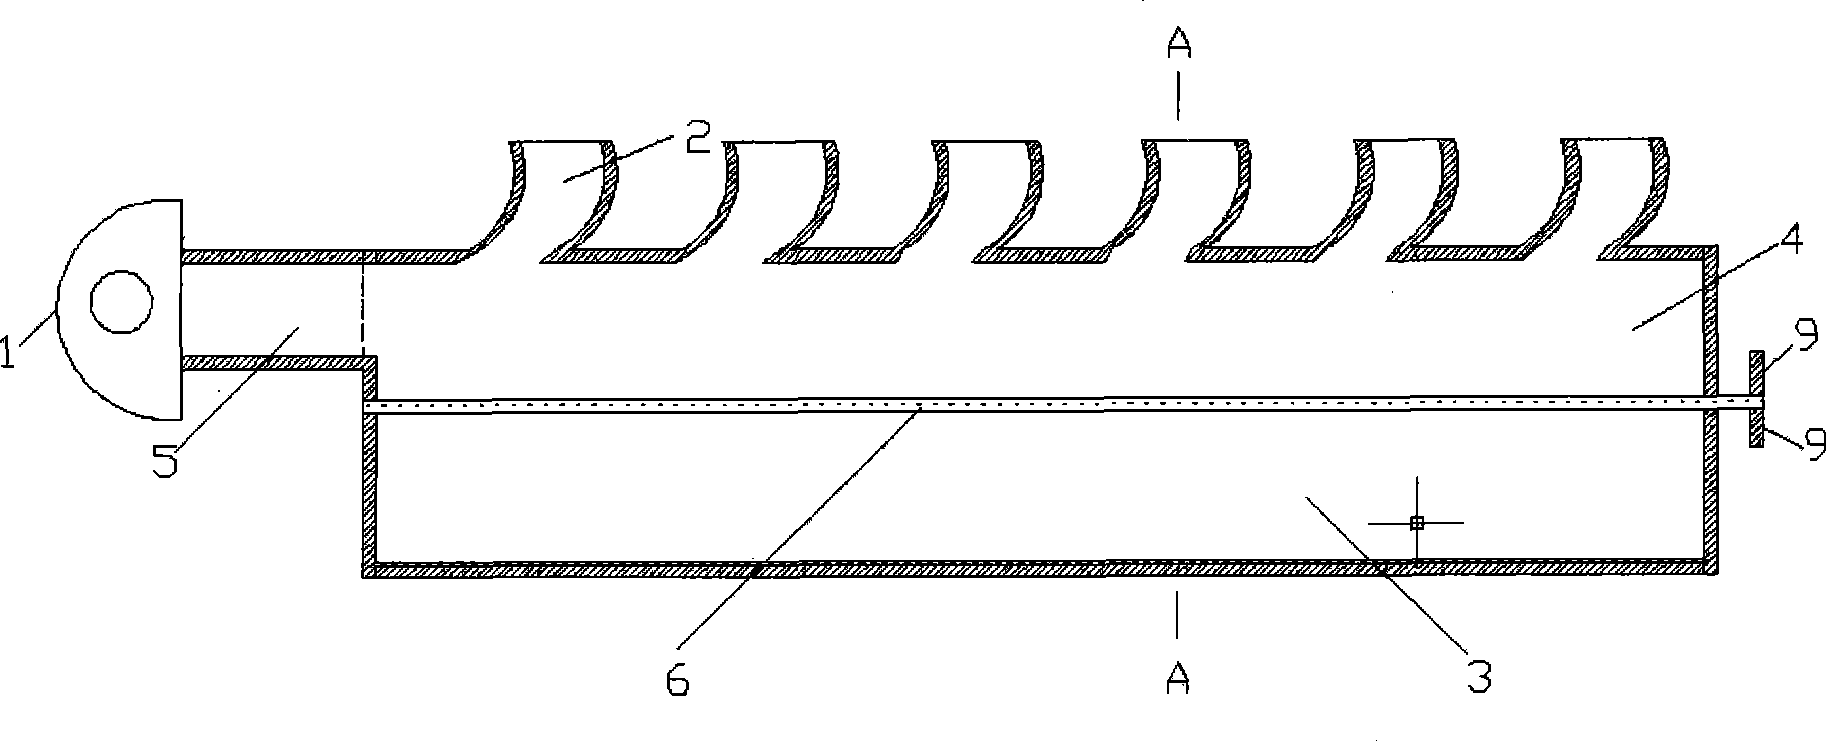 Turbocharging system for adjusting exhausting pipe volume by rotating baffle